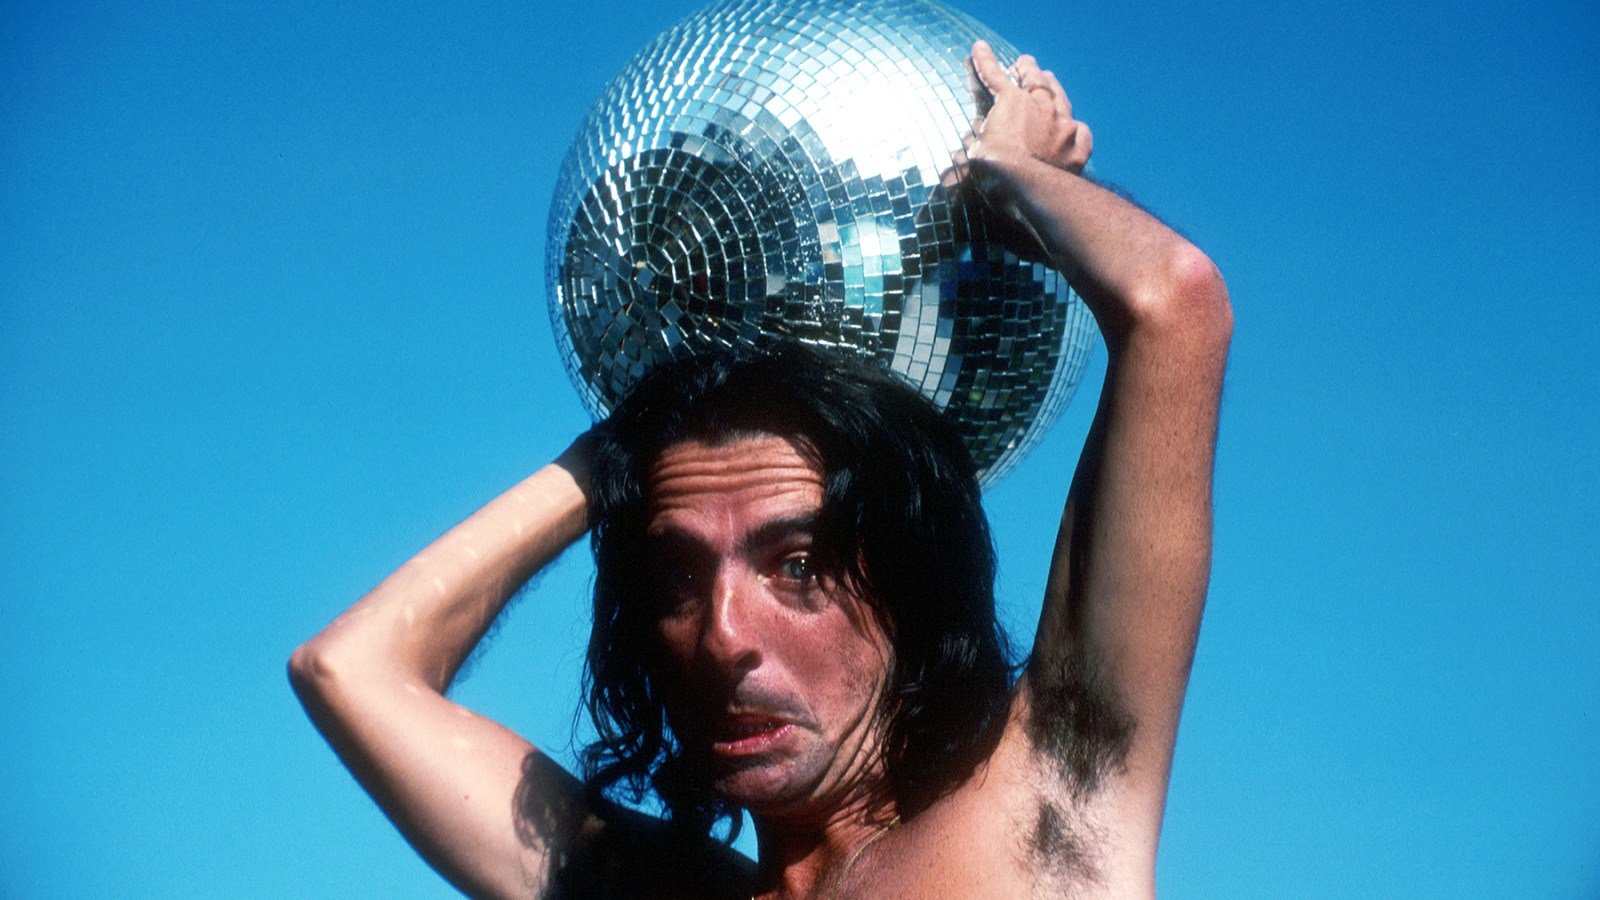 Alice Cooper Once Tossed a Chicken Into an Audience. A New Doc Captures the Mayhem